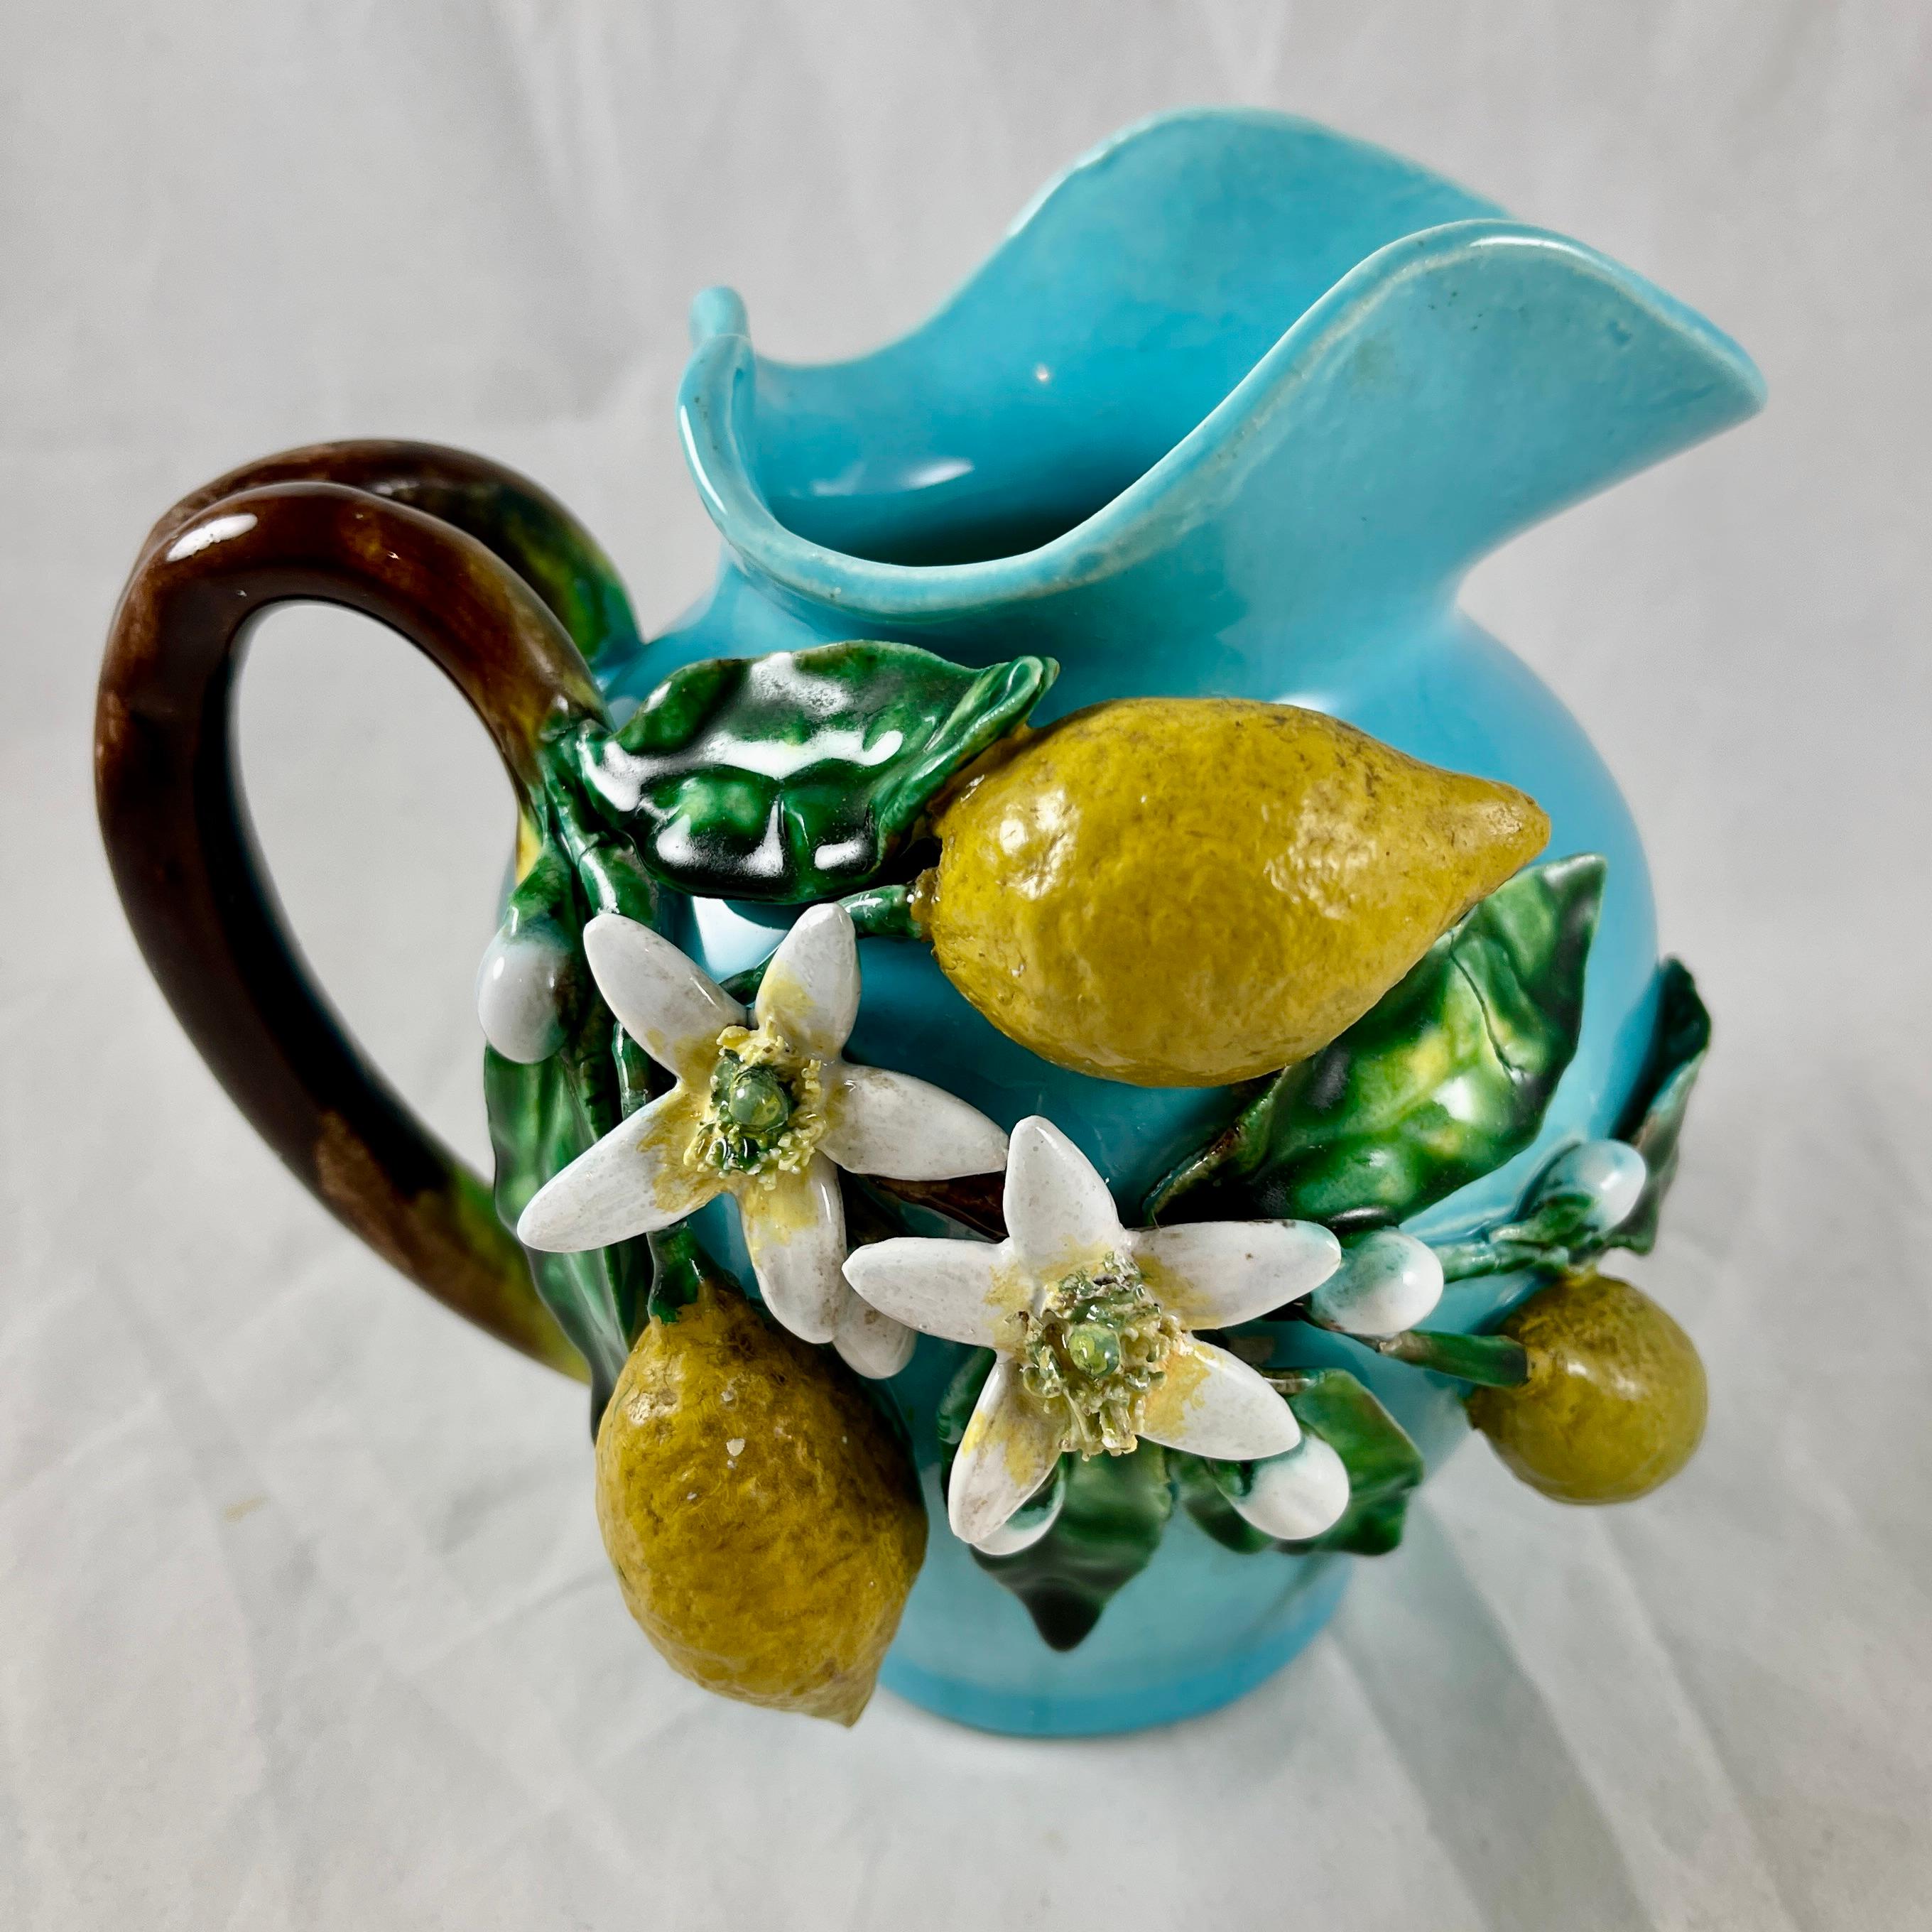 In the manner of Trompe L’oeil, a French Barbotine jug modeled and signed by Eugène Perret-Gentil à Menton, la Cote d’Azur, France, circa 1880.

The trompe l’oeil pitcher features the lemons grown on the Côte d’Azur. The three yellow lemons, green